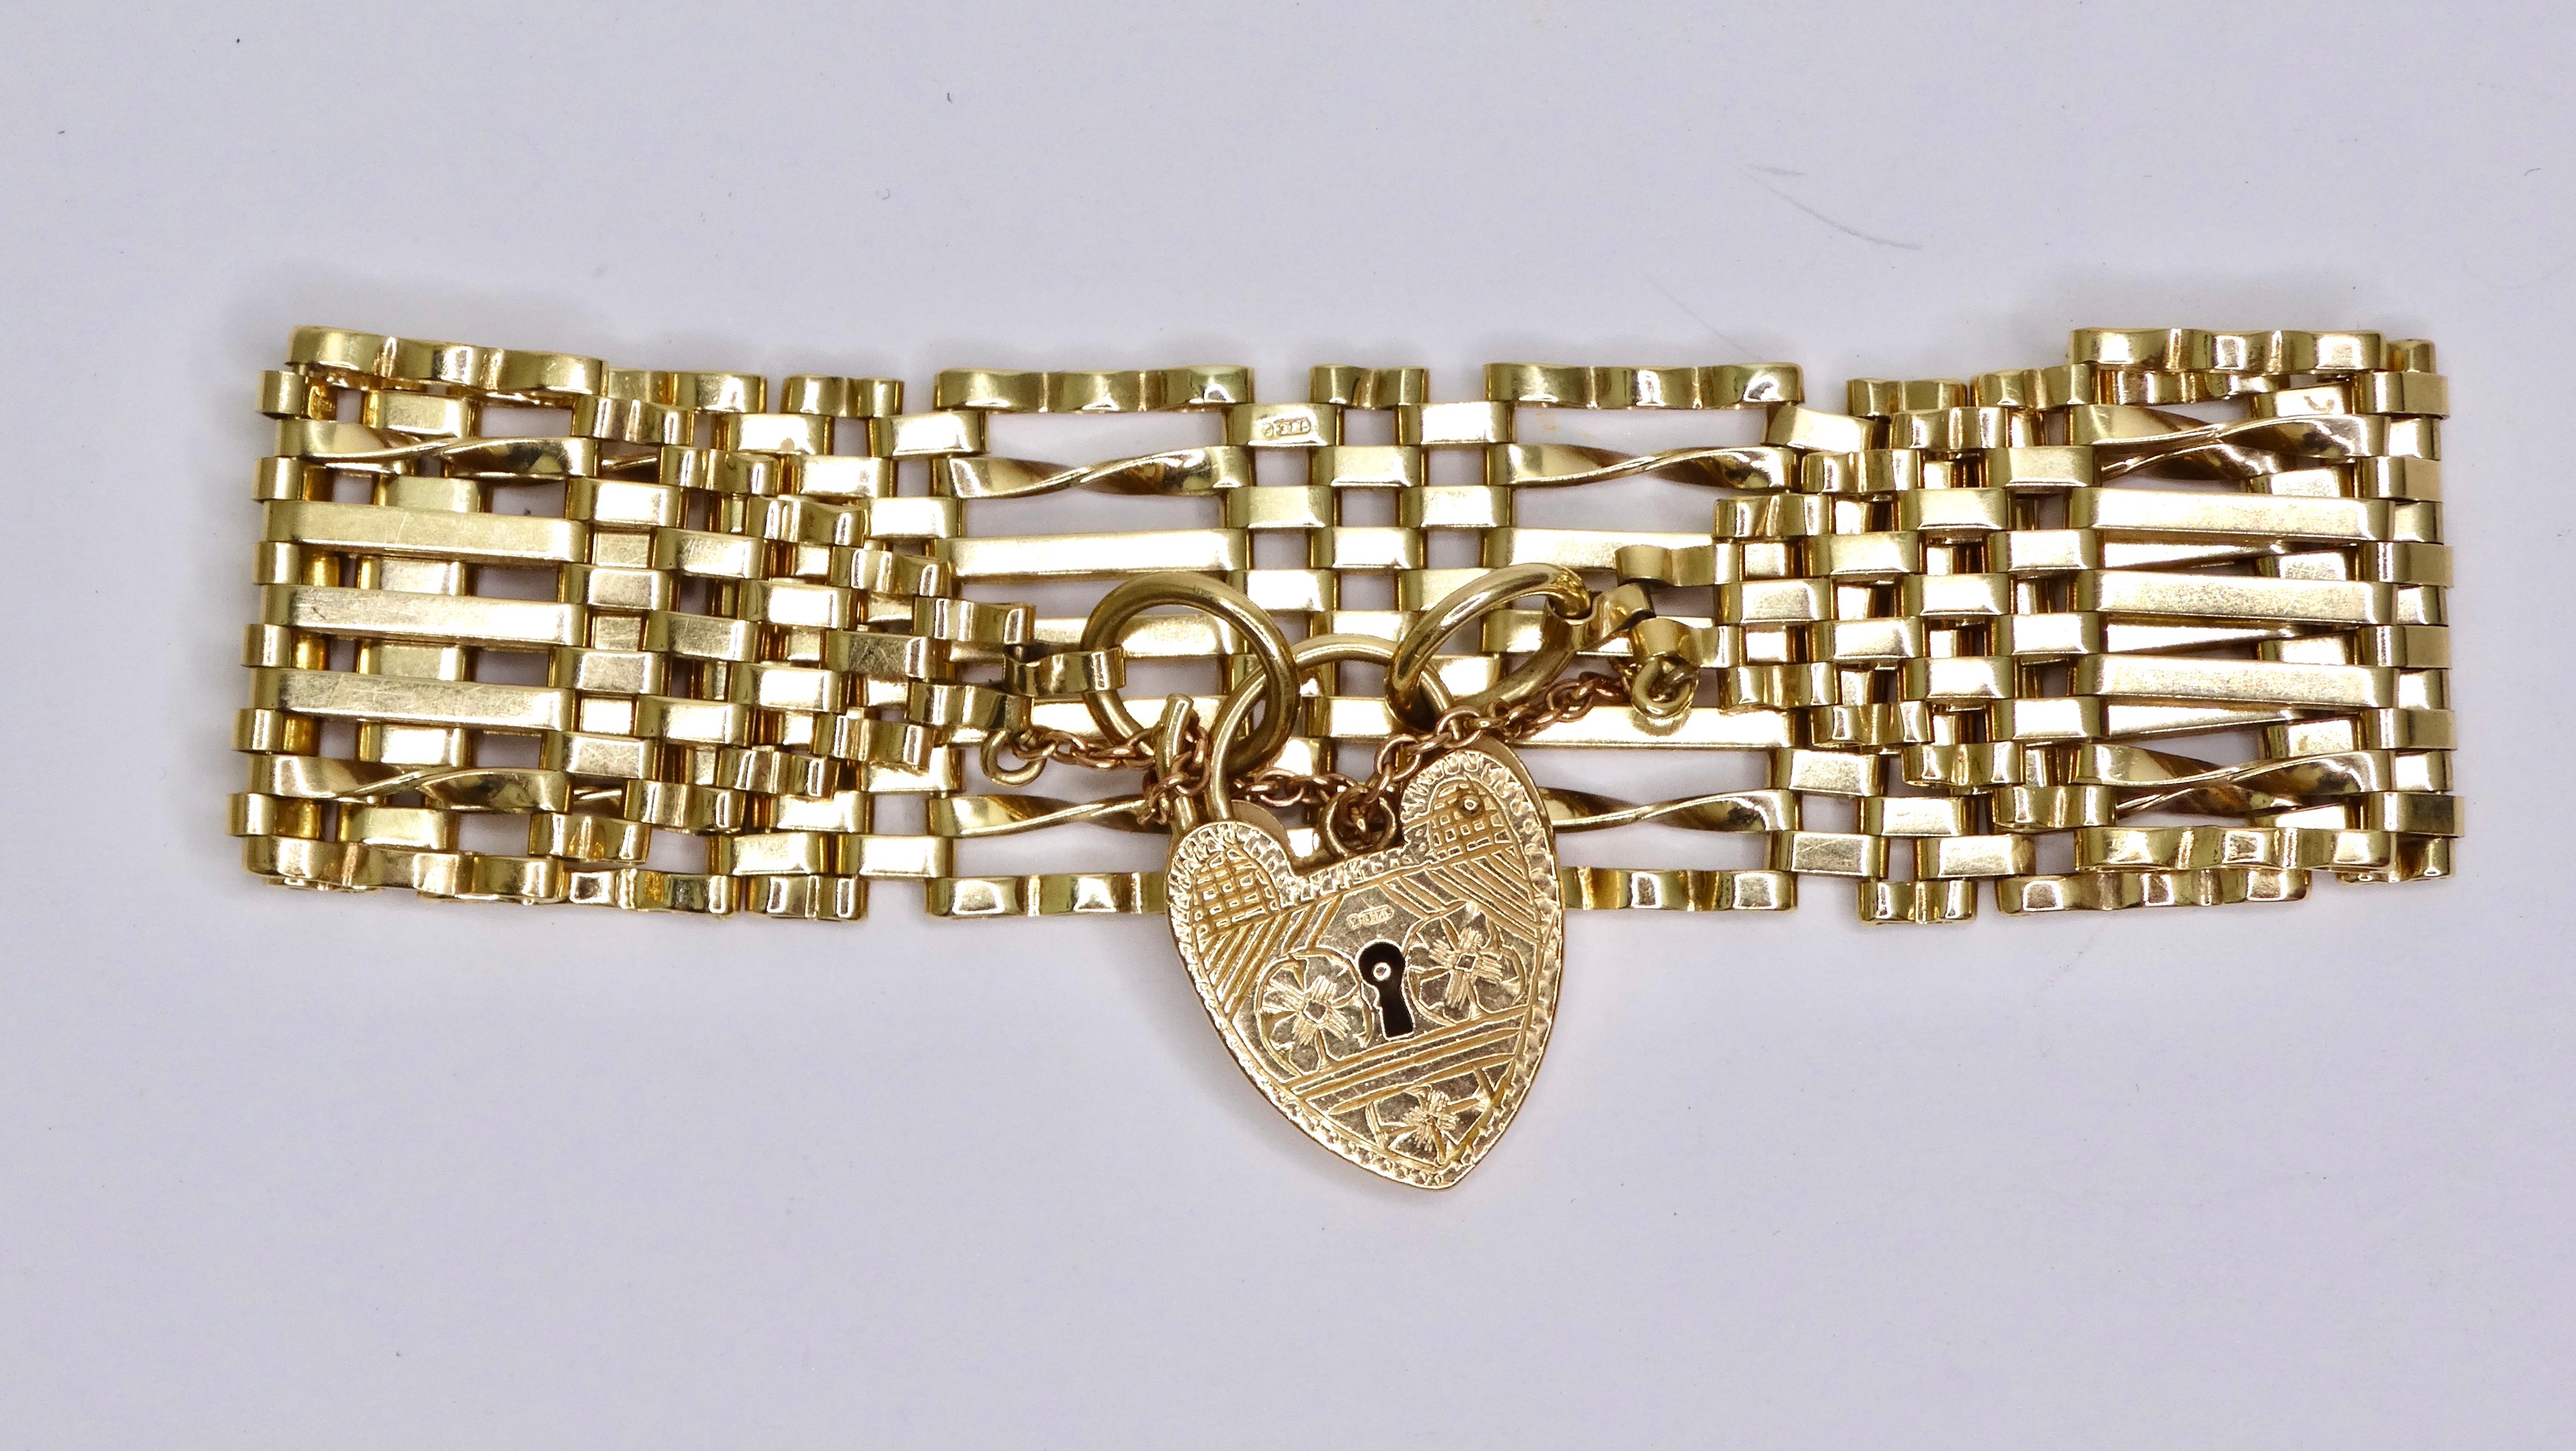 This bracelet will be your next go-to piece of jewelry in your collection! You will be reaching for this bracelet everyday whether it be getting ready for errands or a date-night. This is really a super versatile find! This bracelet is a perfect